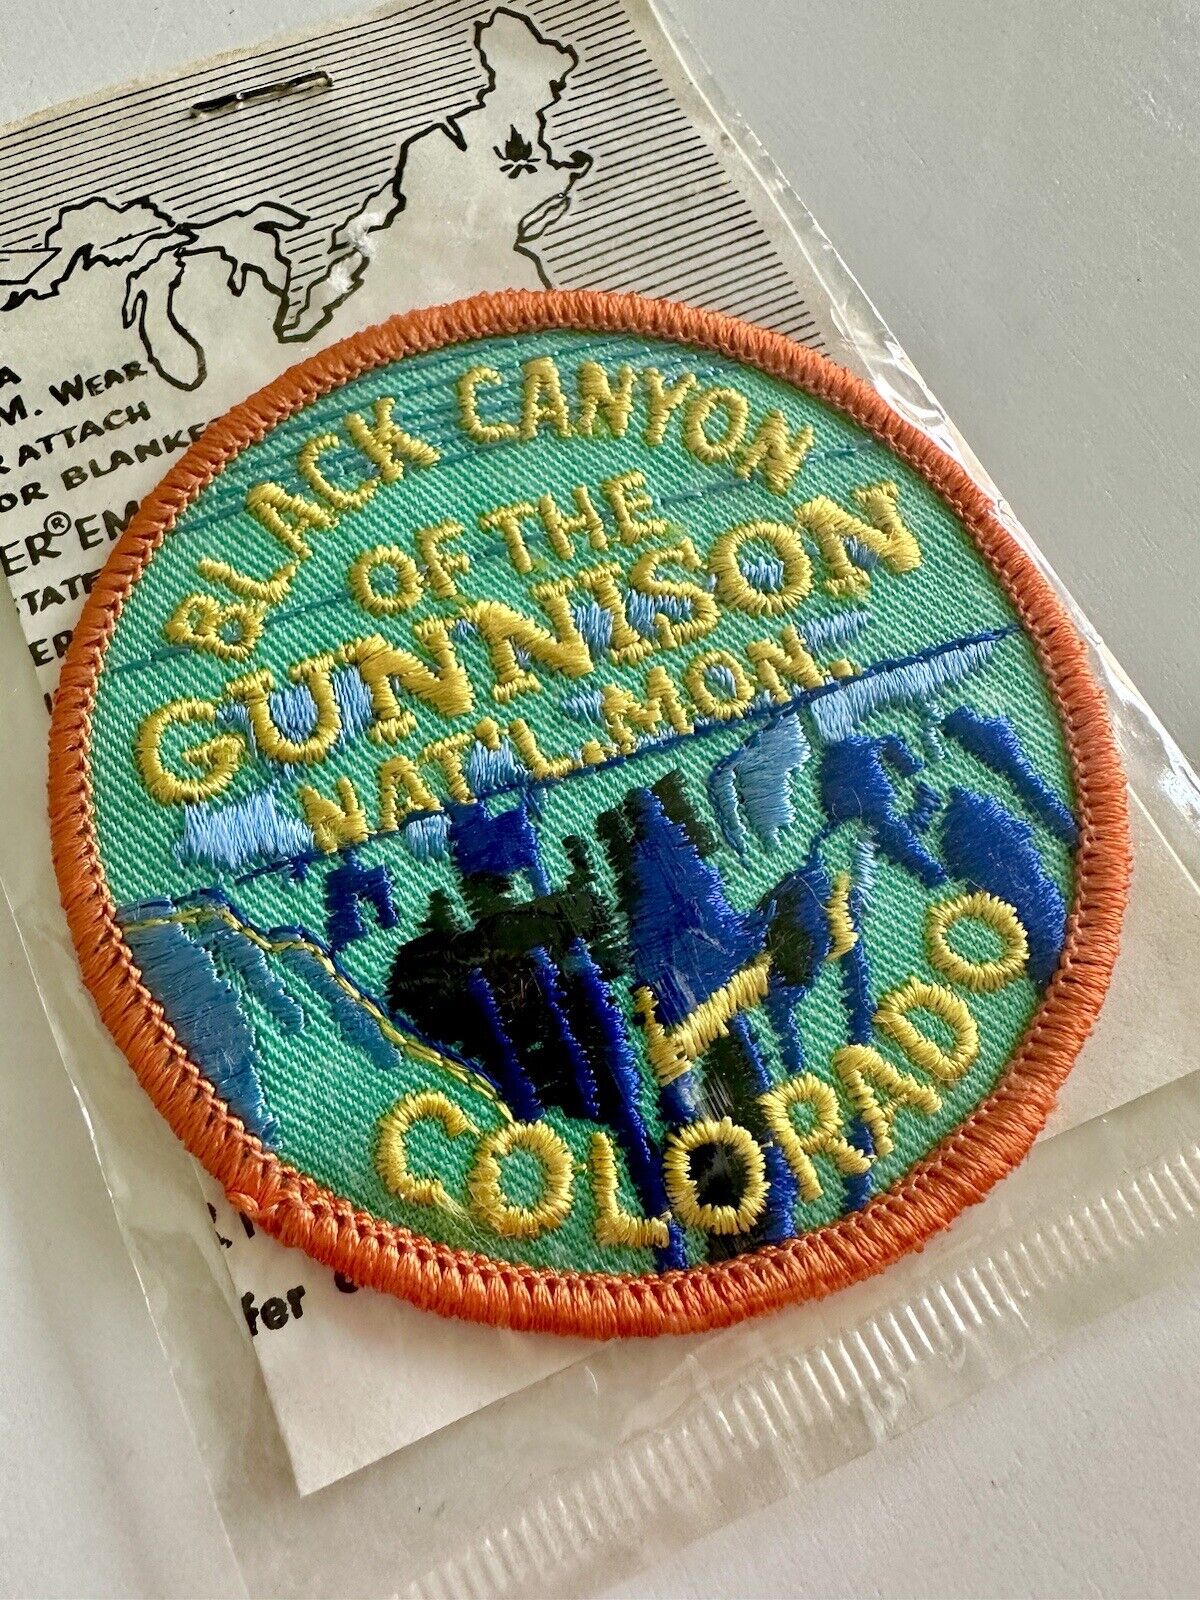 Vintage VTG Black Canyon of the Gunnison National Park Embroidered Iron-on Patch